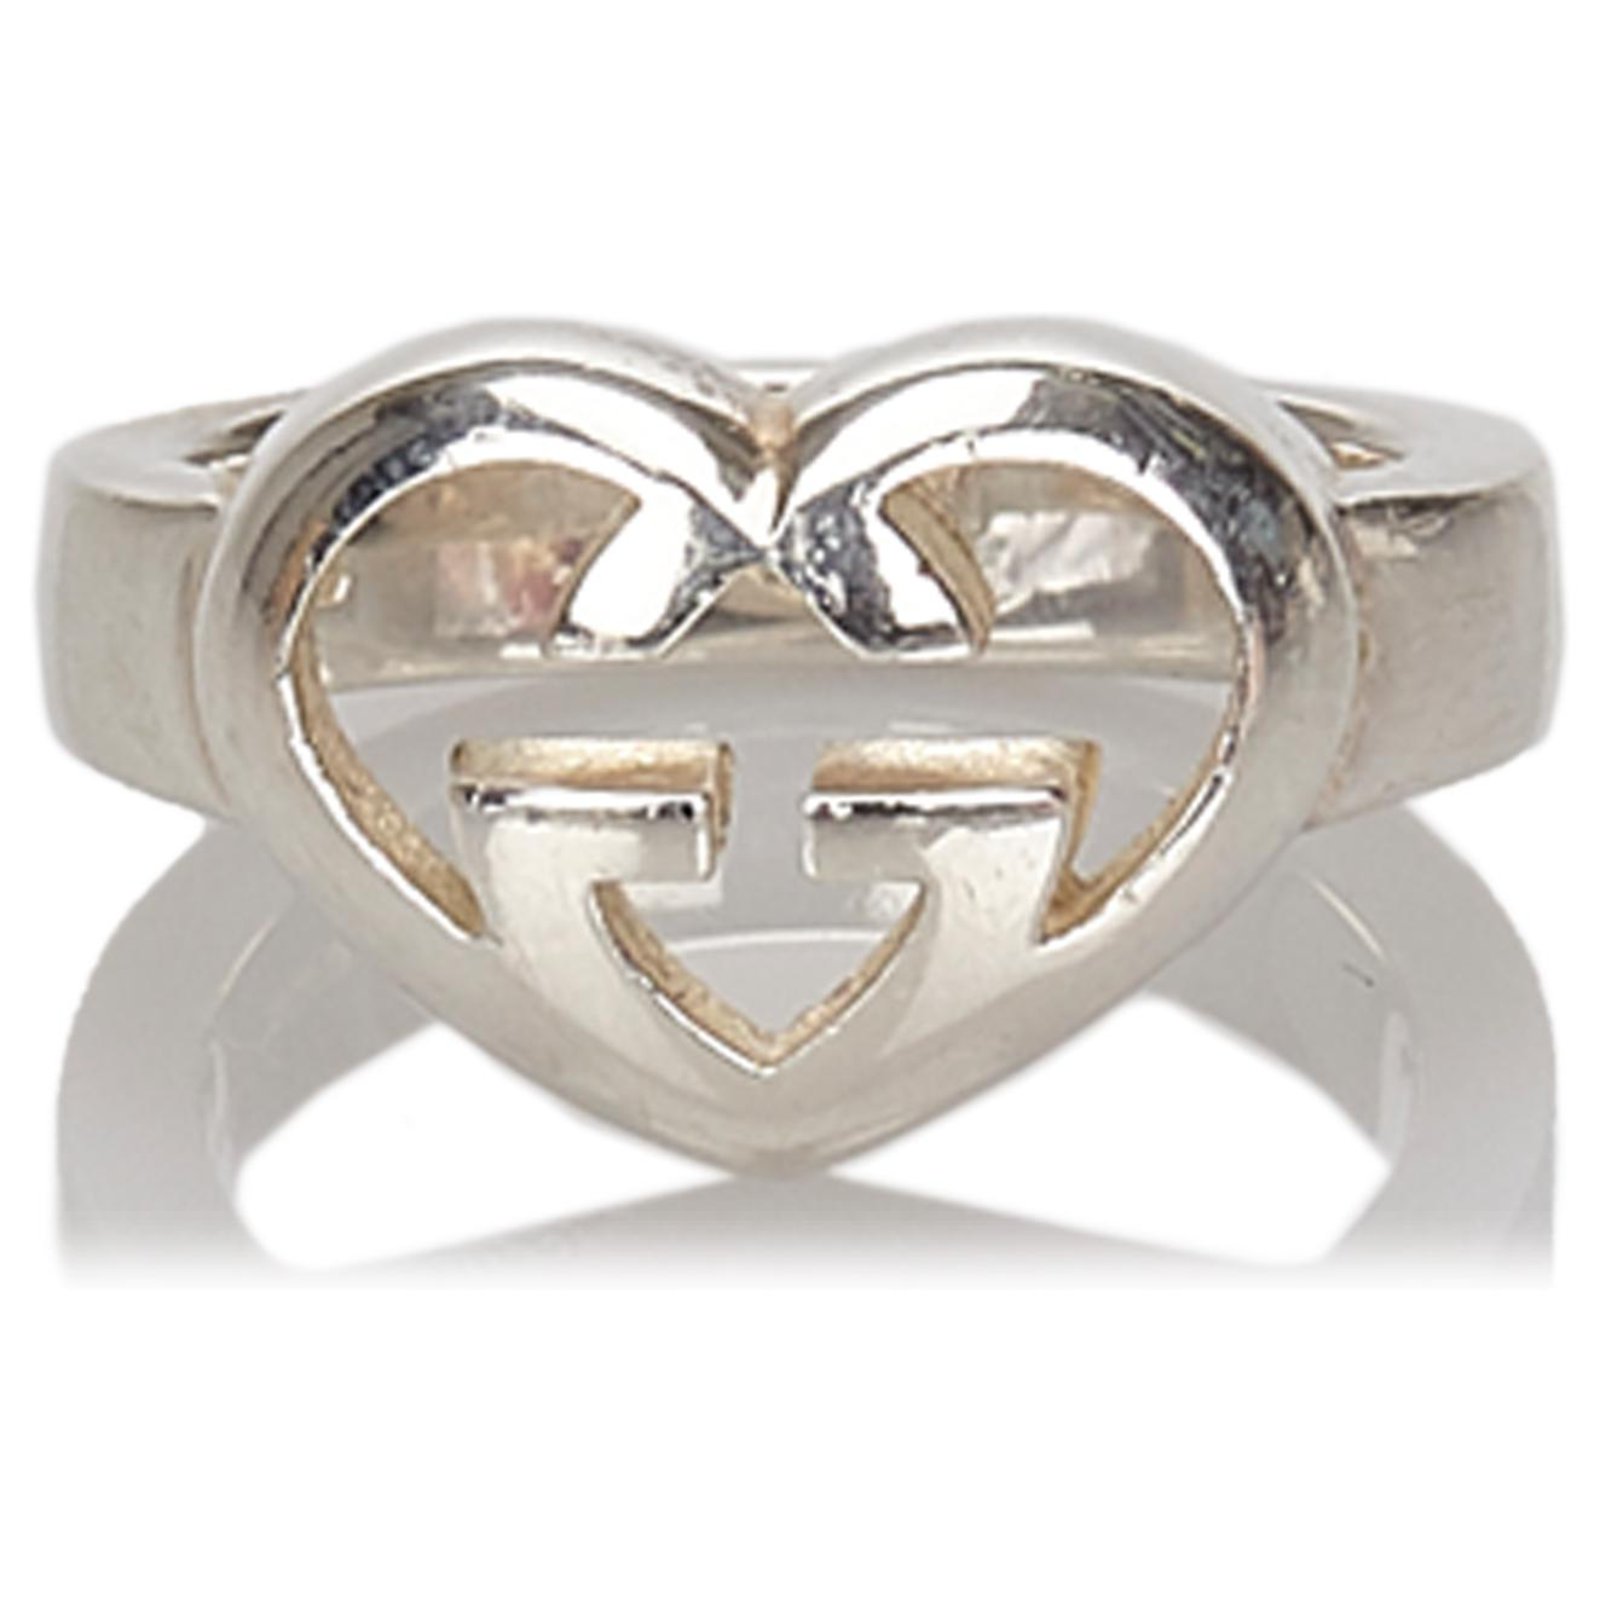 gucci heart ring silver